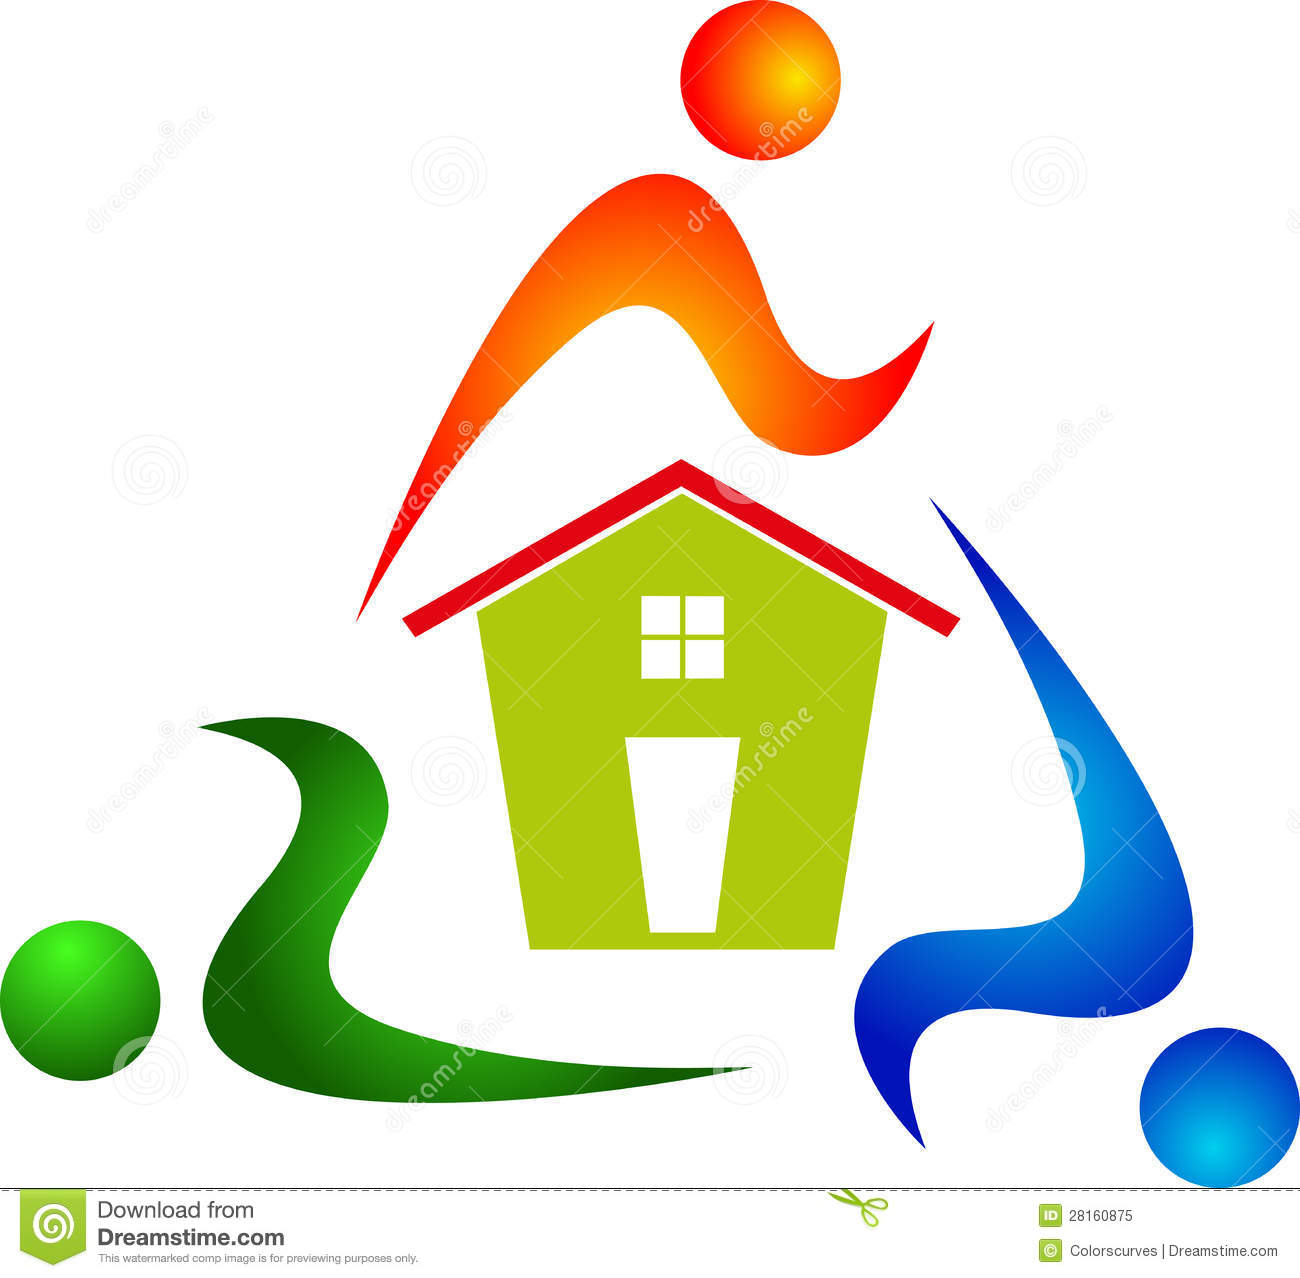 People Rotation With Home Care Royalty Free Stock Photo   Image